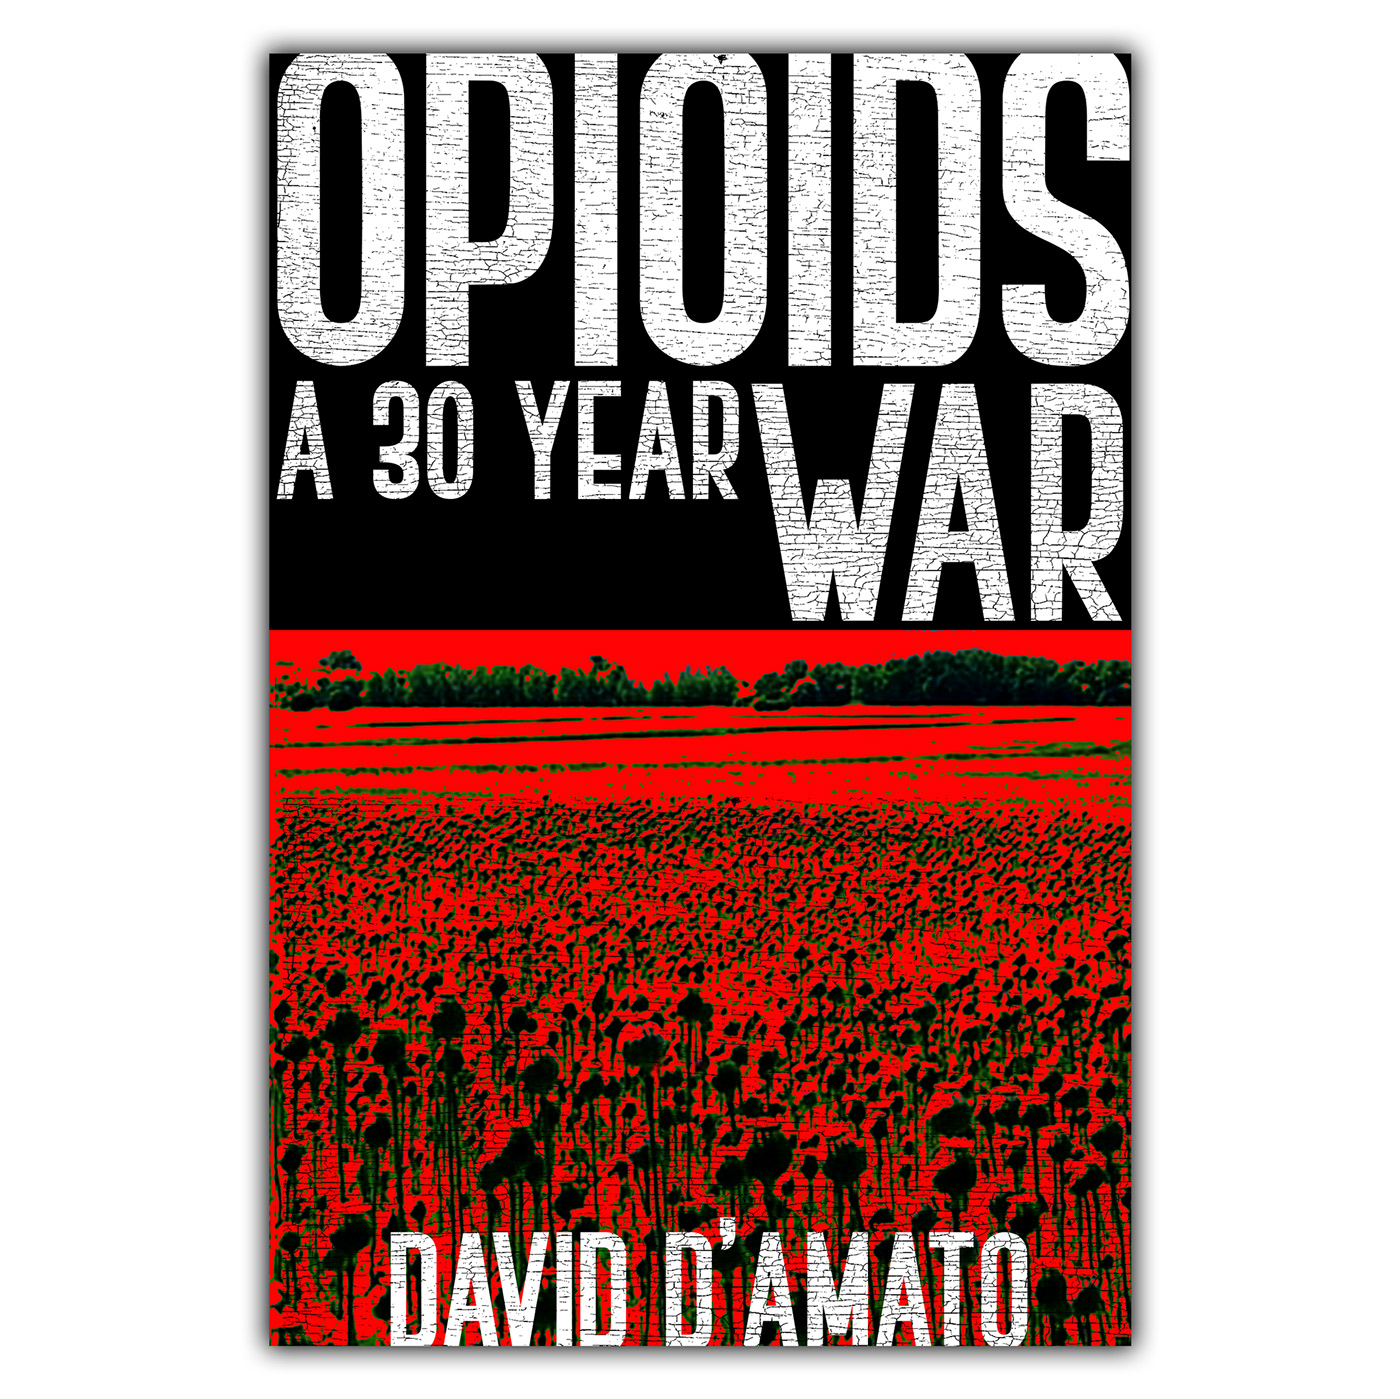 A 30 YEAR STORY OPIOIDS BOOK